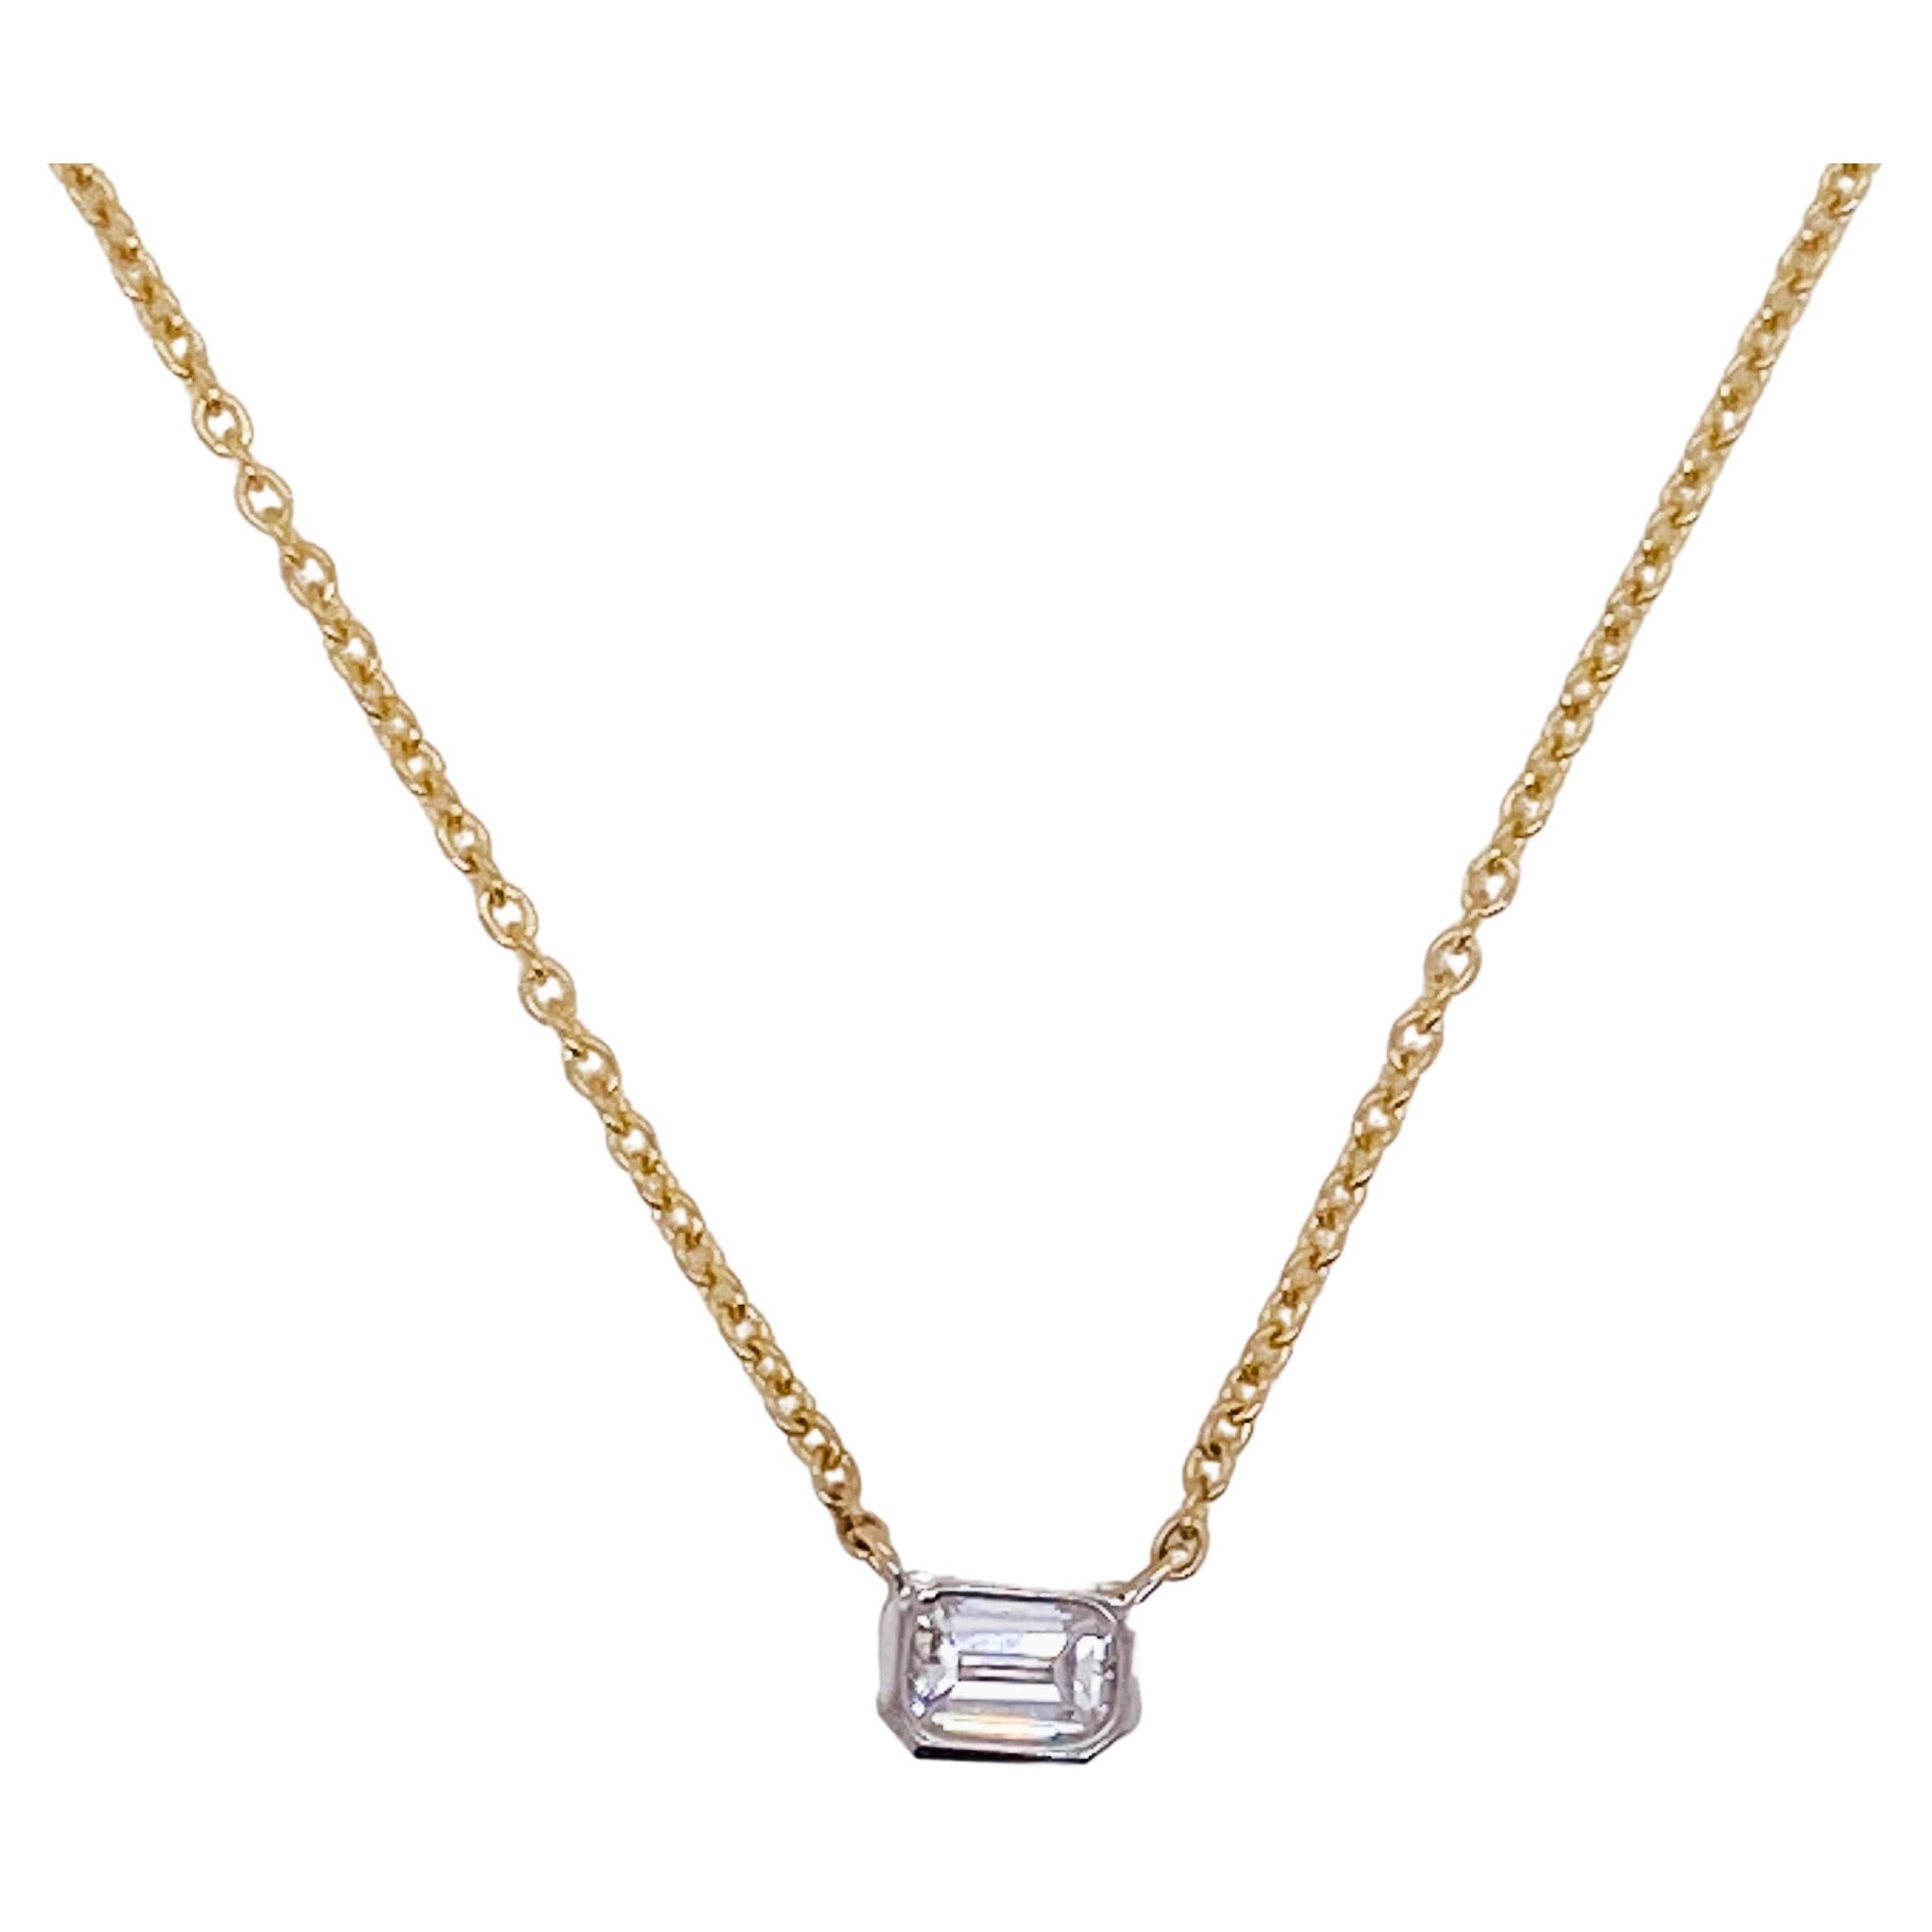 Enchanting Emerald Cut Diamond Necklace .18 Carats in Two-Tone 14K Gold LV For Sale